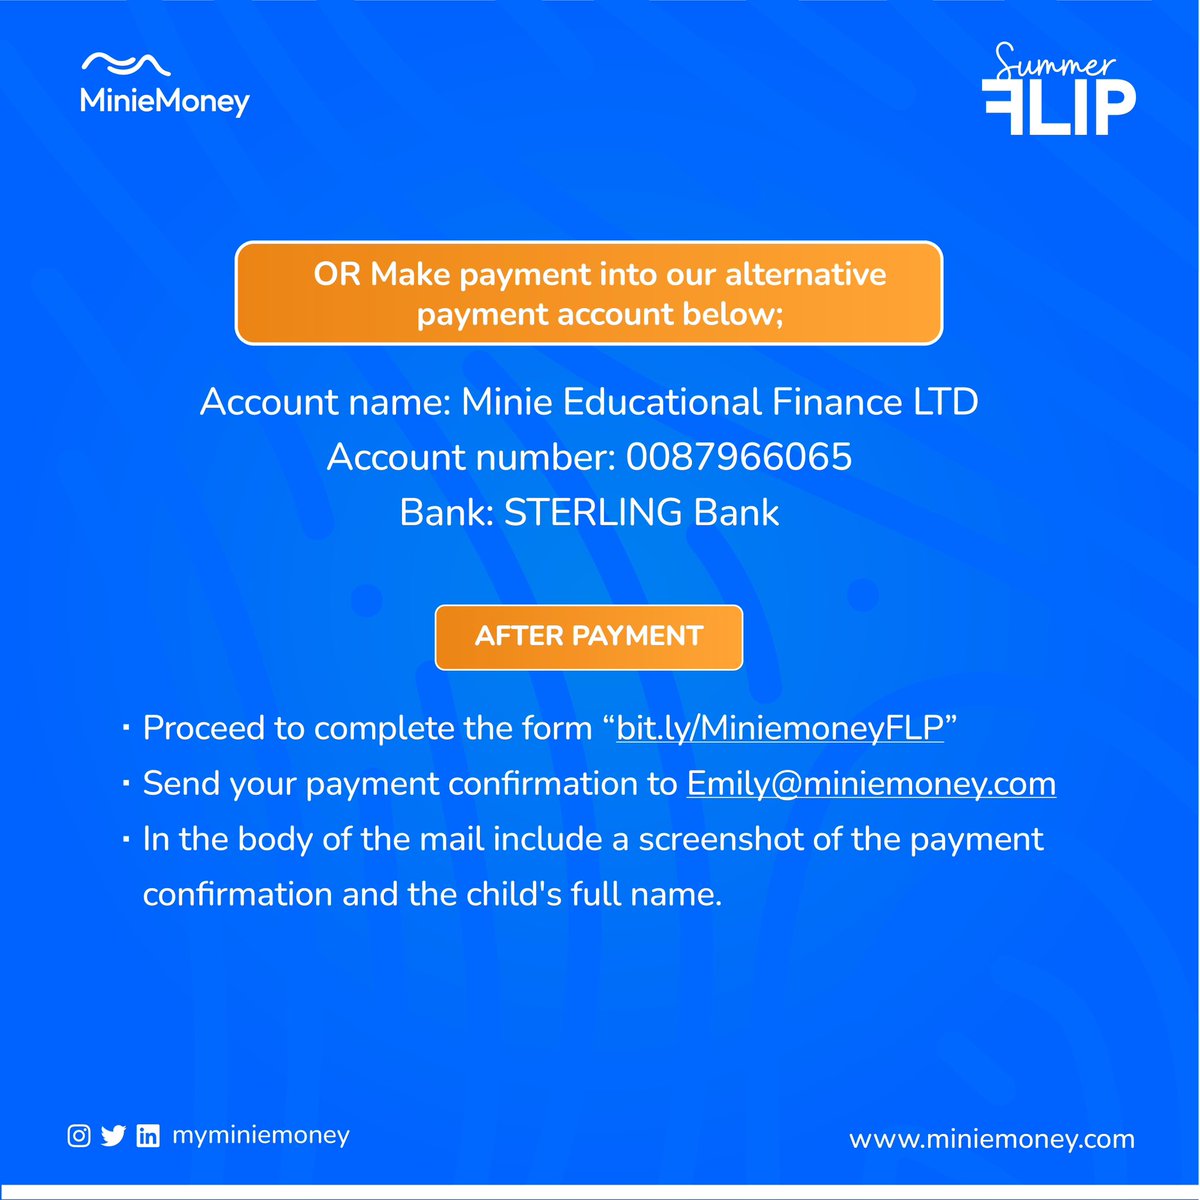 Don't miss this opportunity to empower your child with essential financial knowledge from the comfort of your home! 

Make payment using miniemoney.com/@miniemoney

Don’t forget to fill the form bit.ly/MiniemoneyFLP

 #EmpoweringKids #OnlineLearning #FinanceForKids